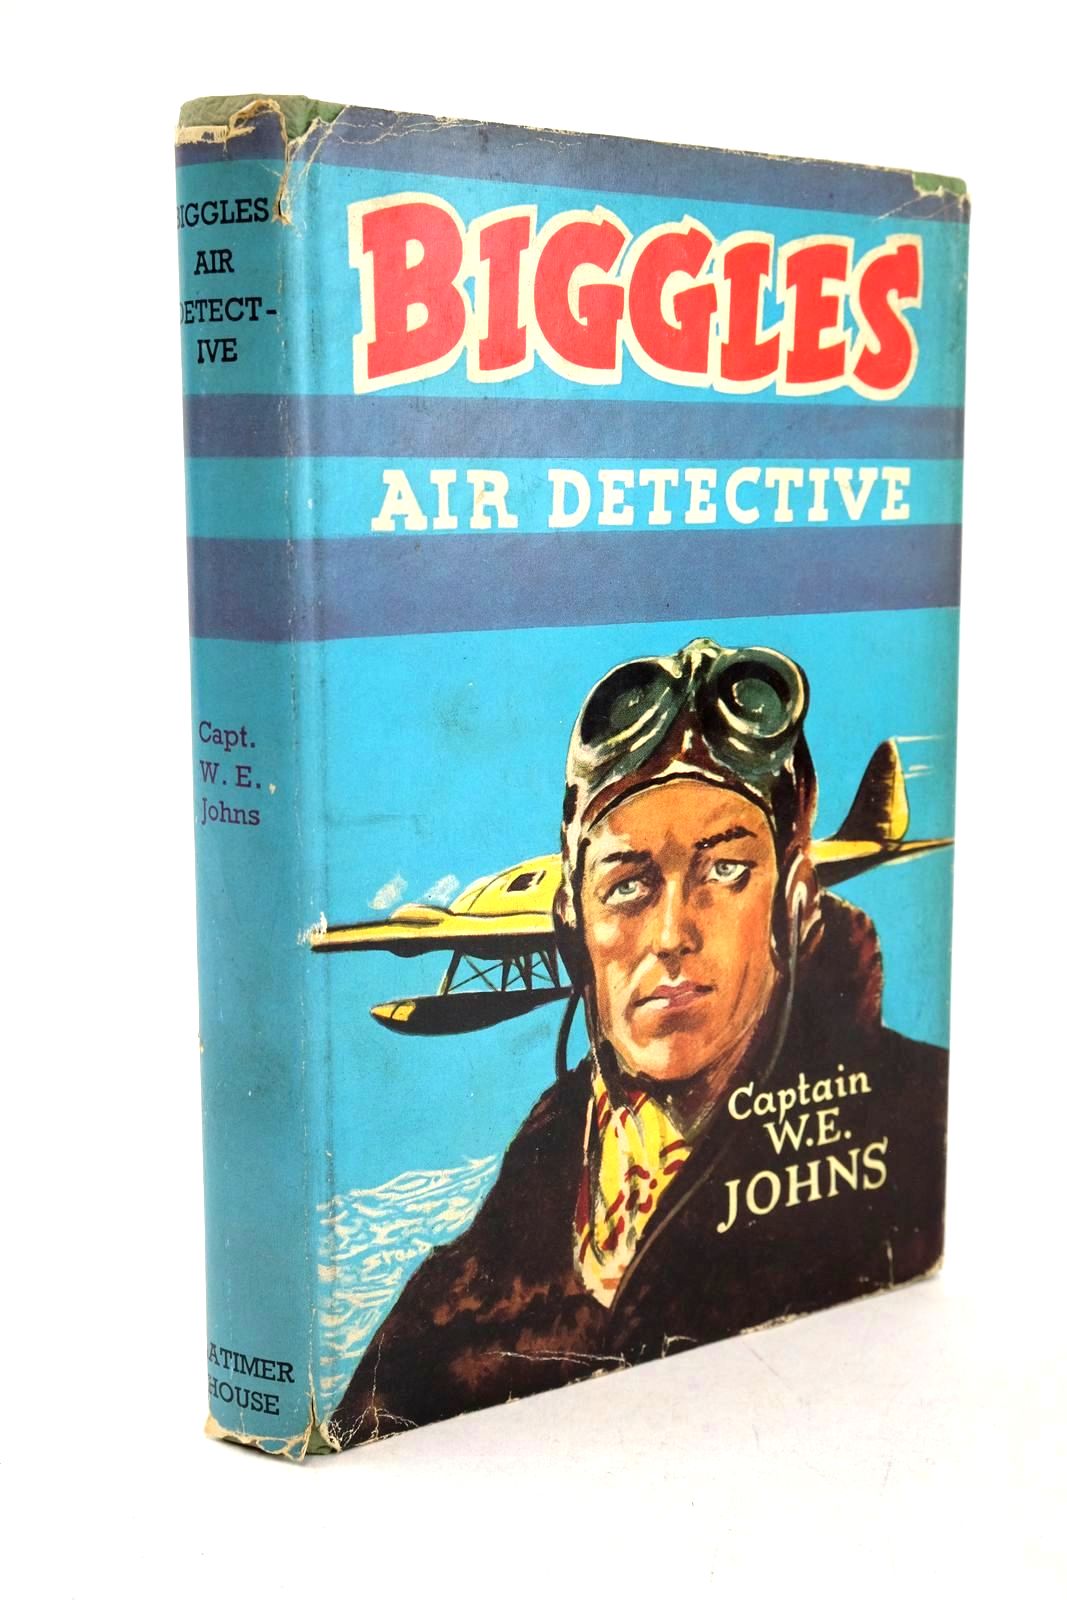 Photo of BIGGLES AIR DETECTIVE written by Johns, W.E. published by Latimer House Ltd. (STOCK CODE: 1326595)  for sale by Stella & Rose's Books